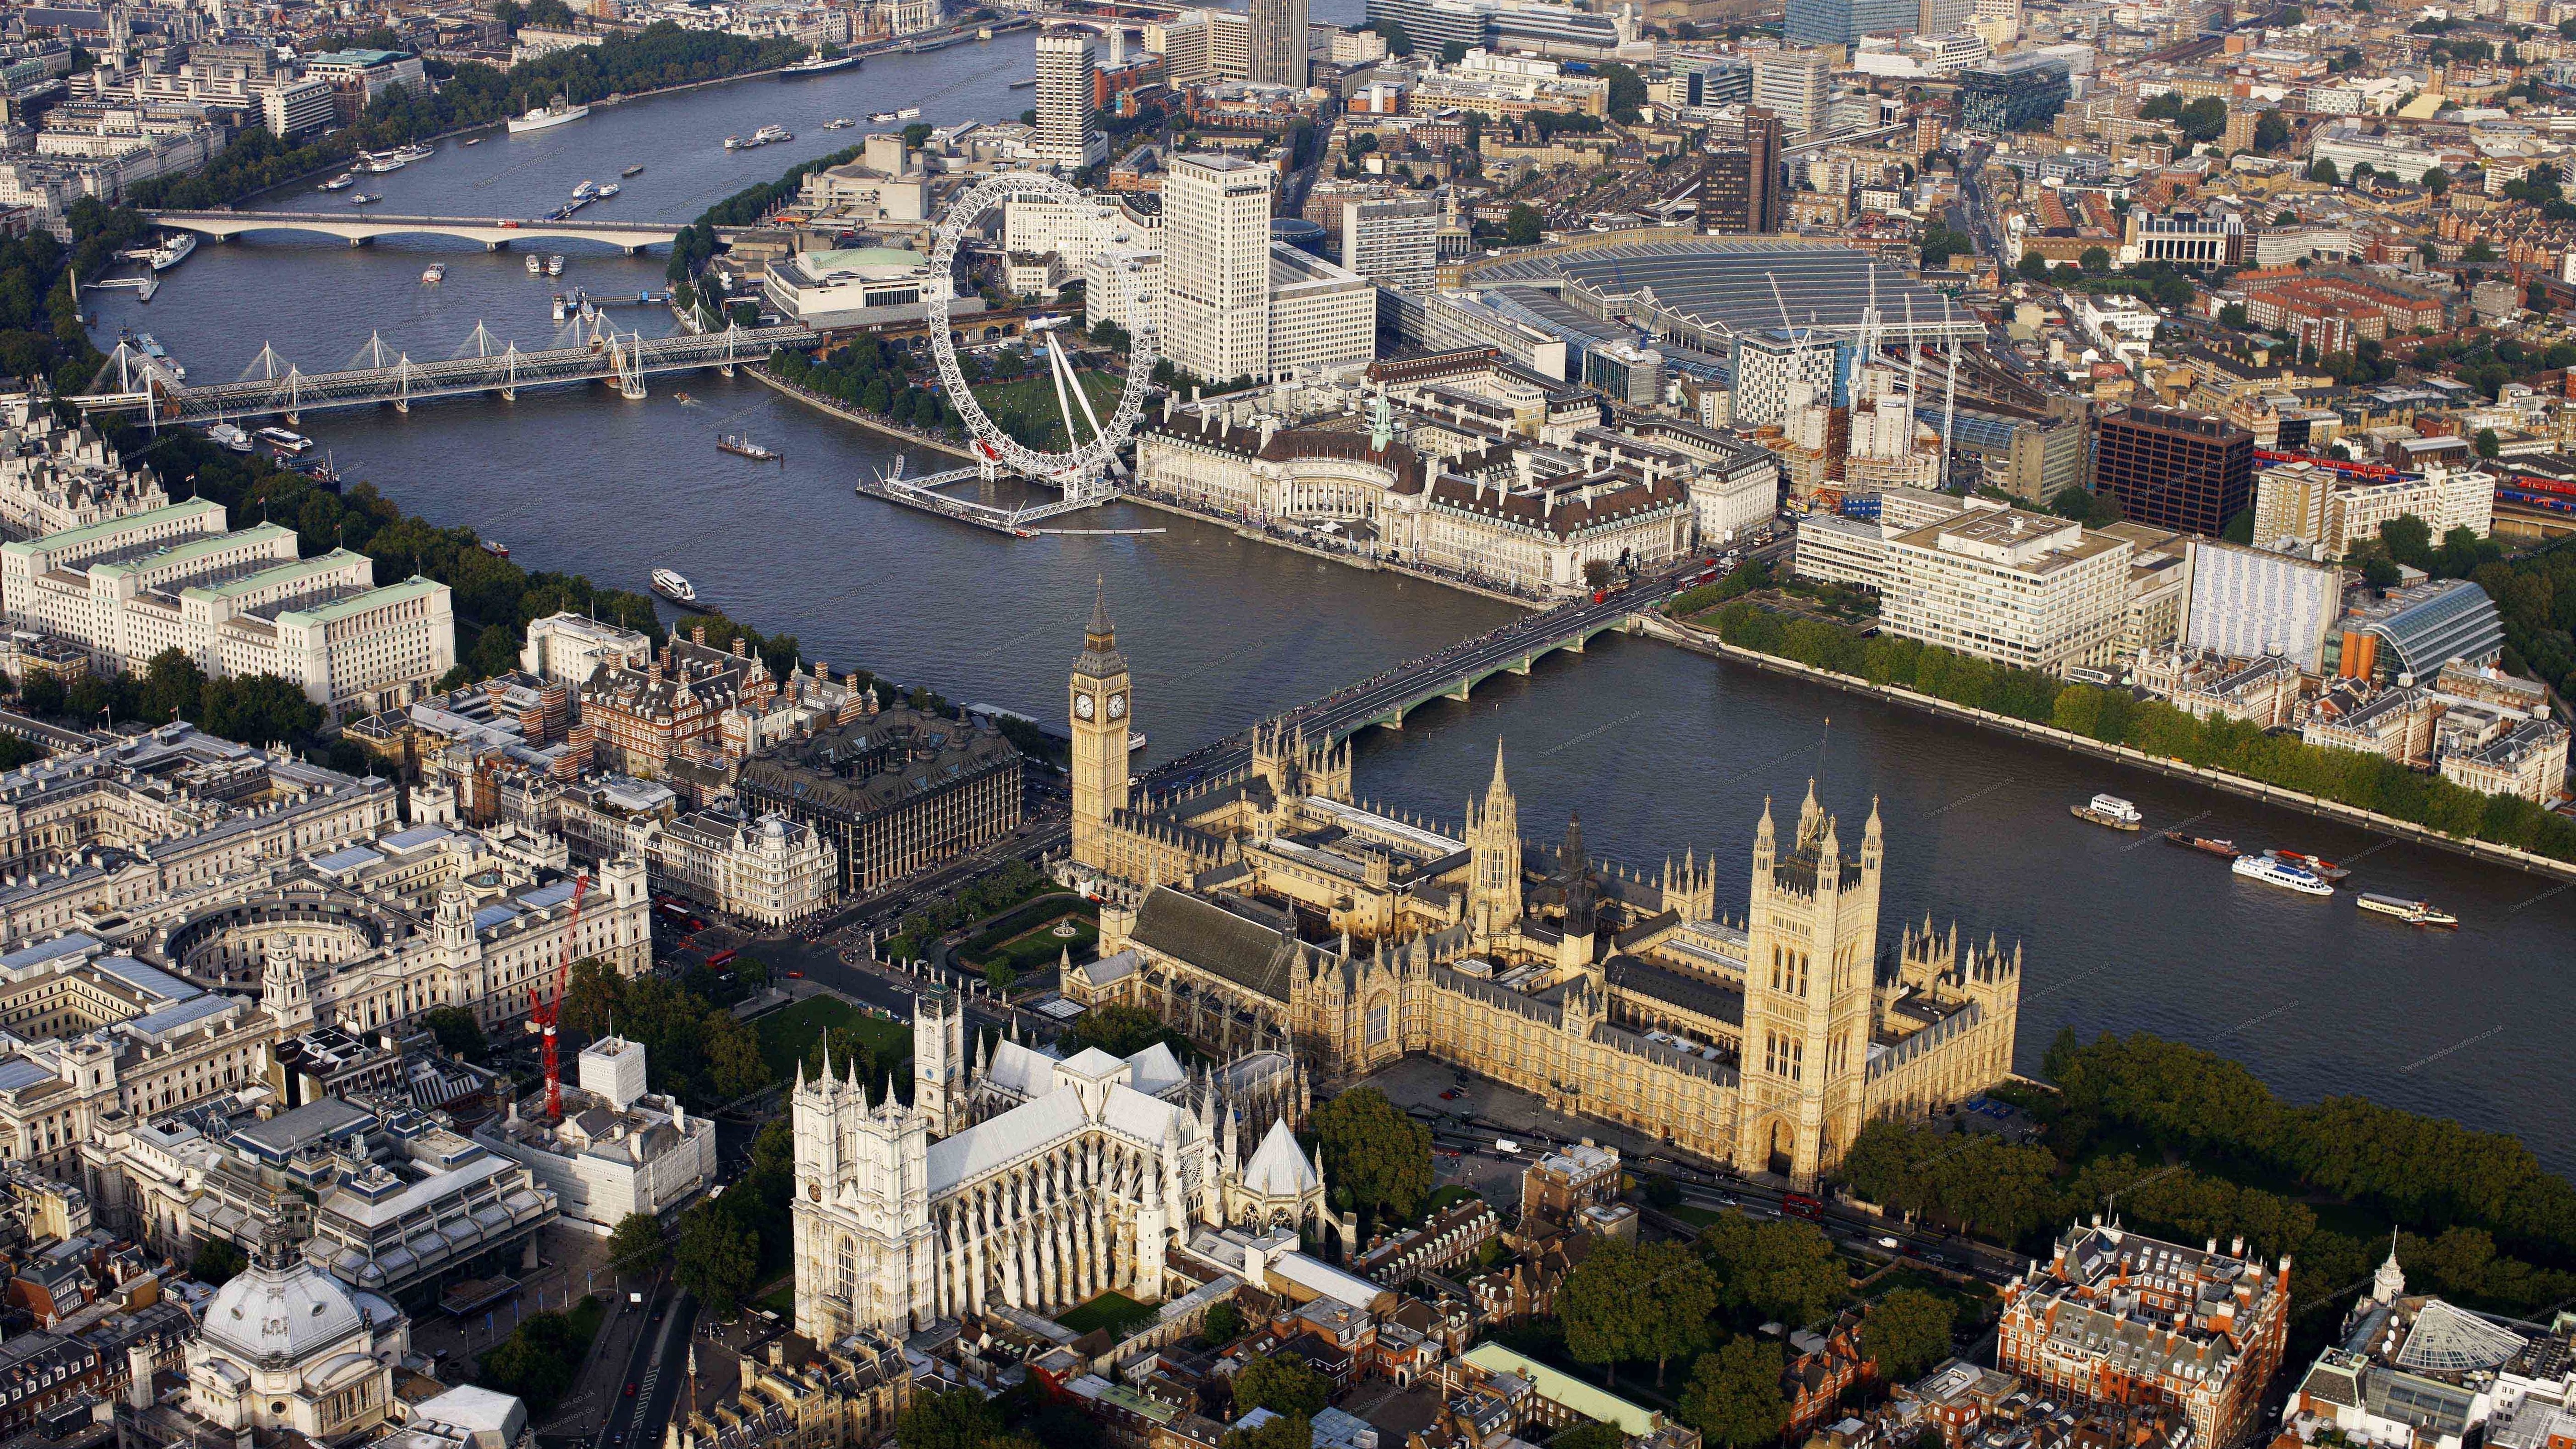 Image: London, Big Ben, Westminster Abbey, the wheel, the river, the bridges, the view, buildings, ships